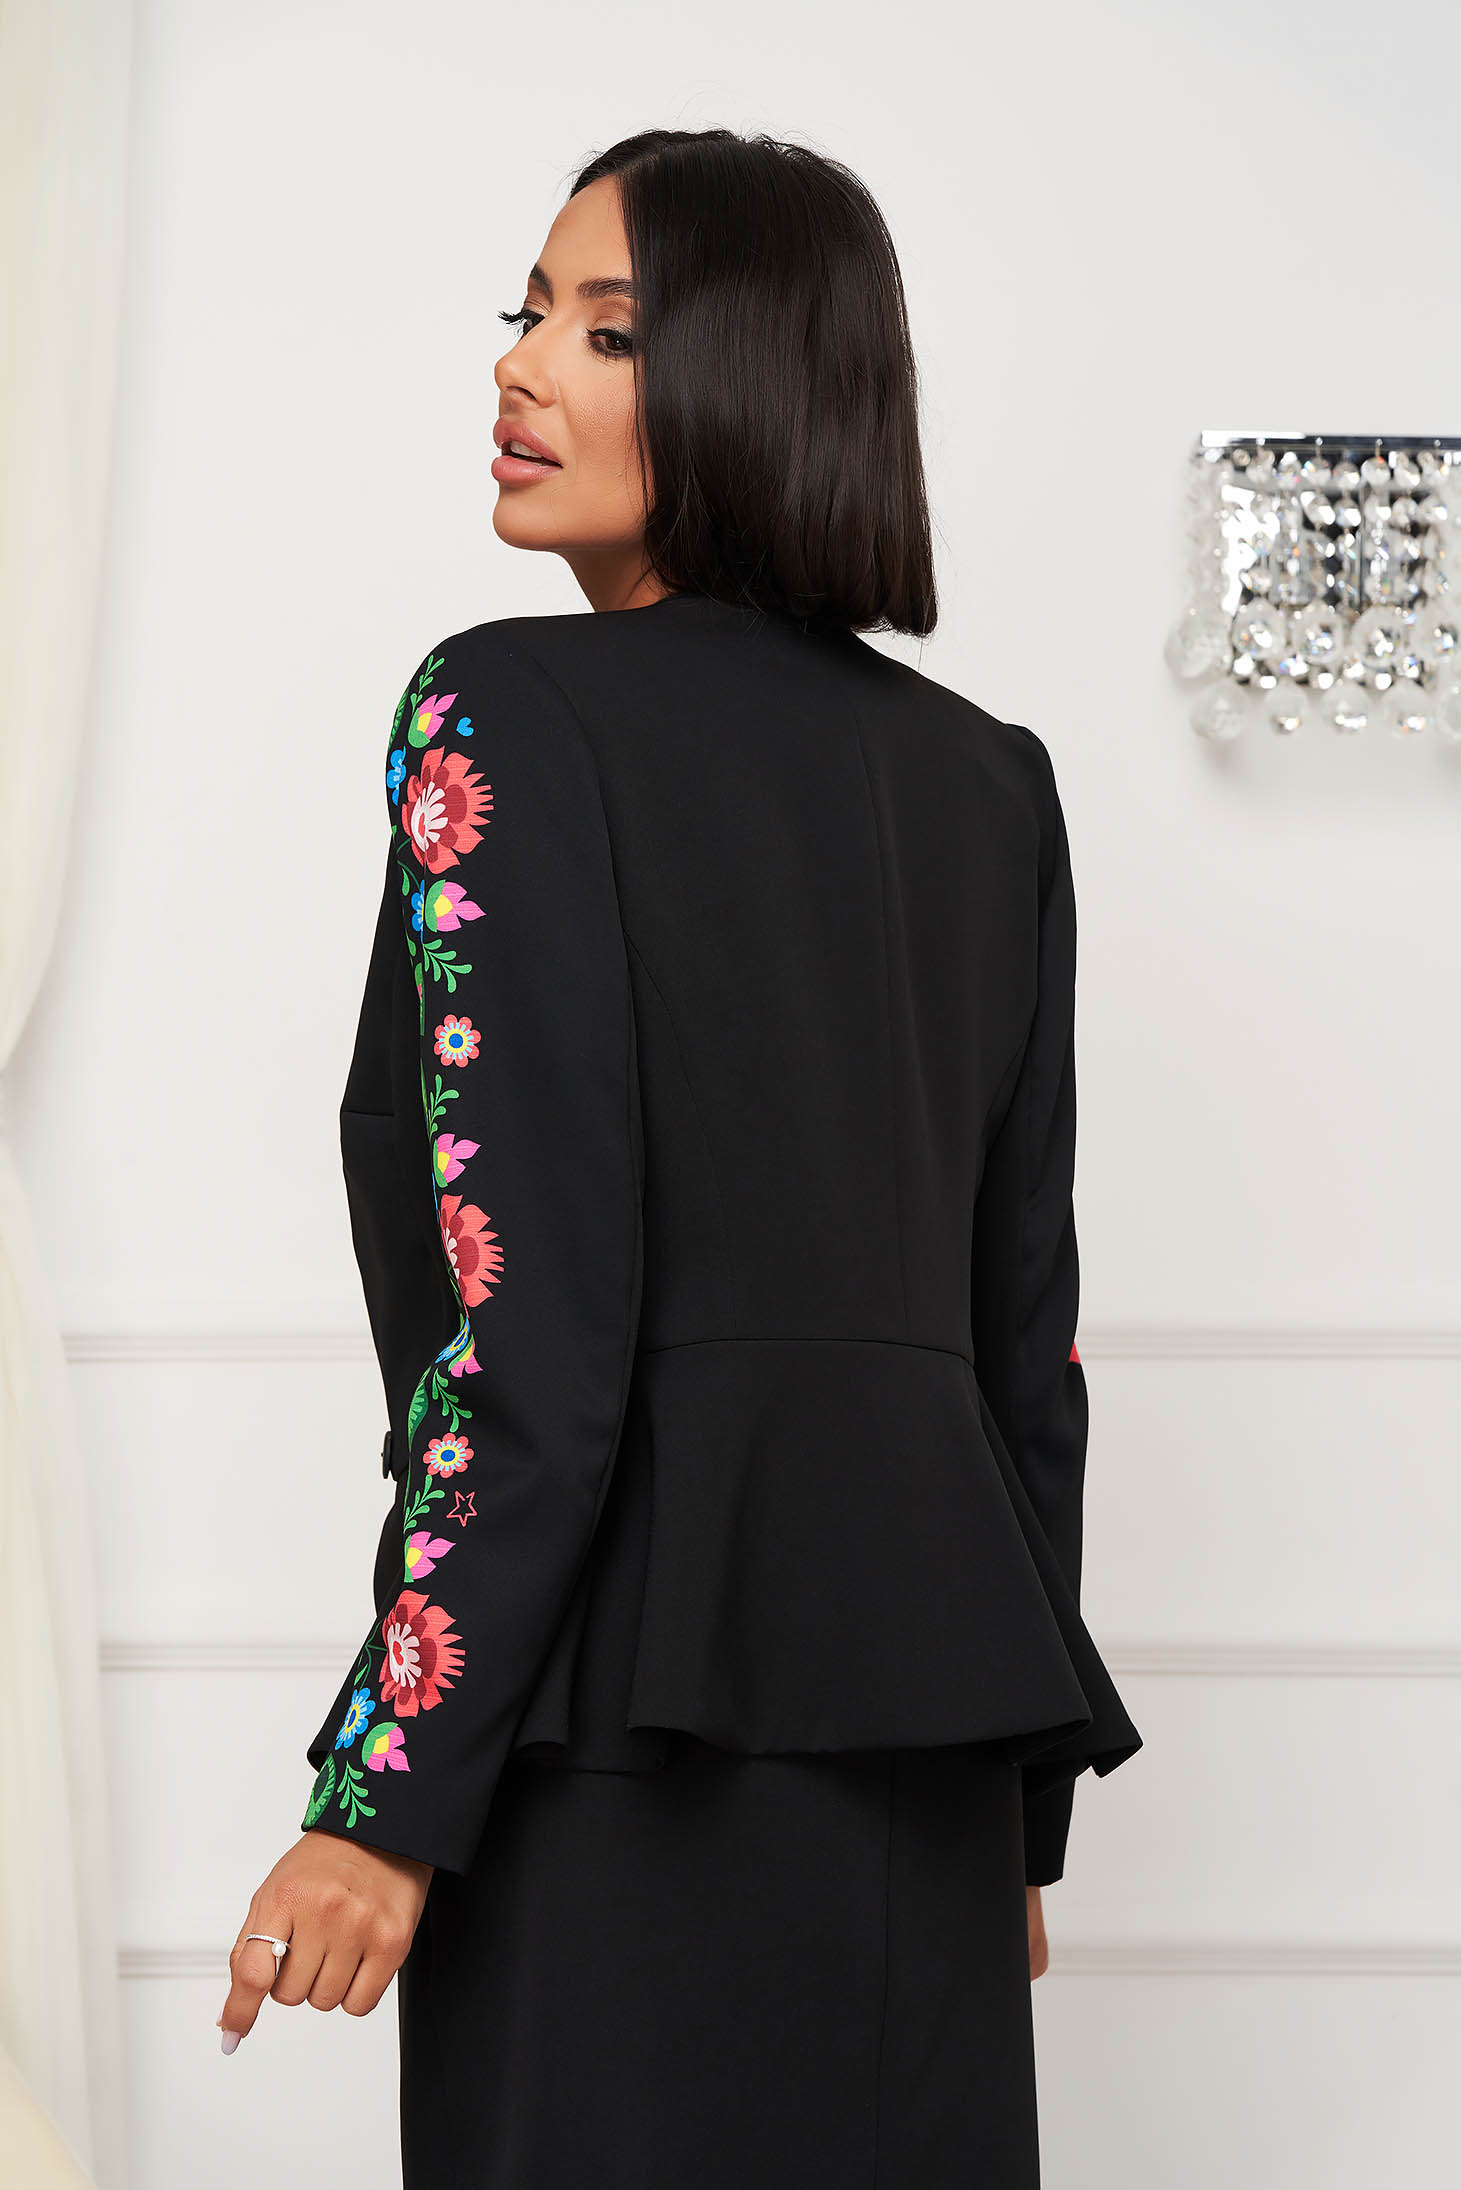 Elastic Fabric Fitted Jacket with Digital Floral Print - StarShinerS 2 - StarShinerS.com